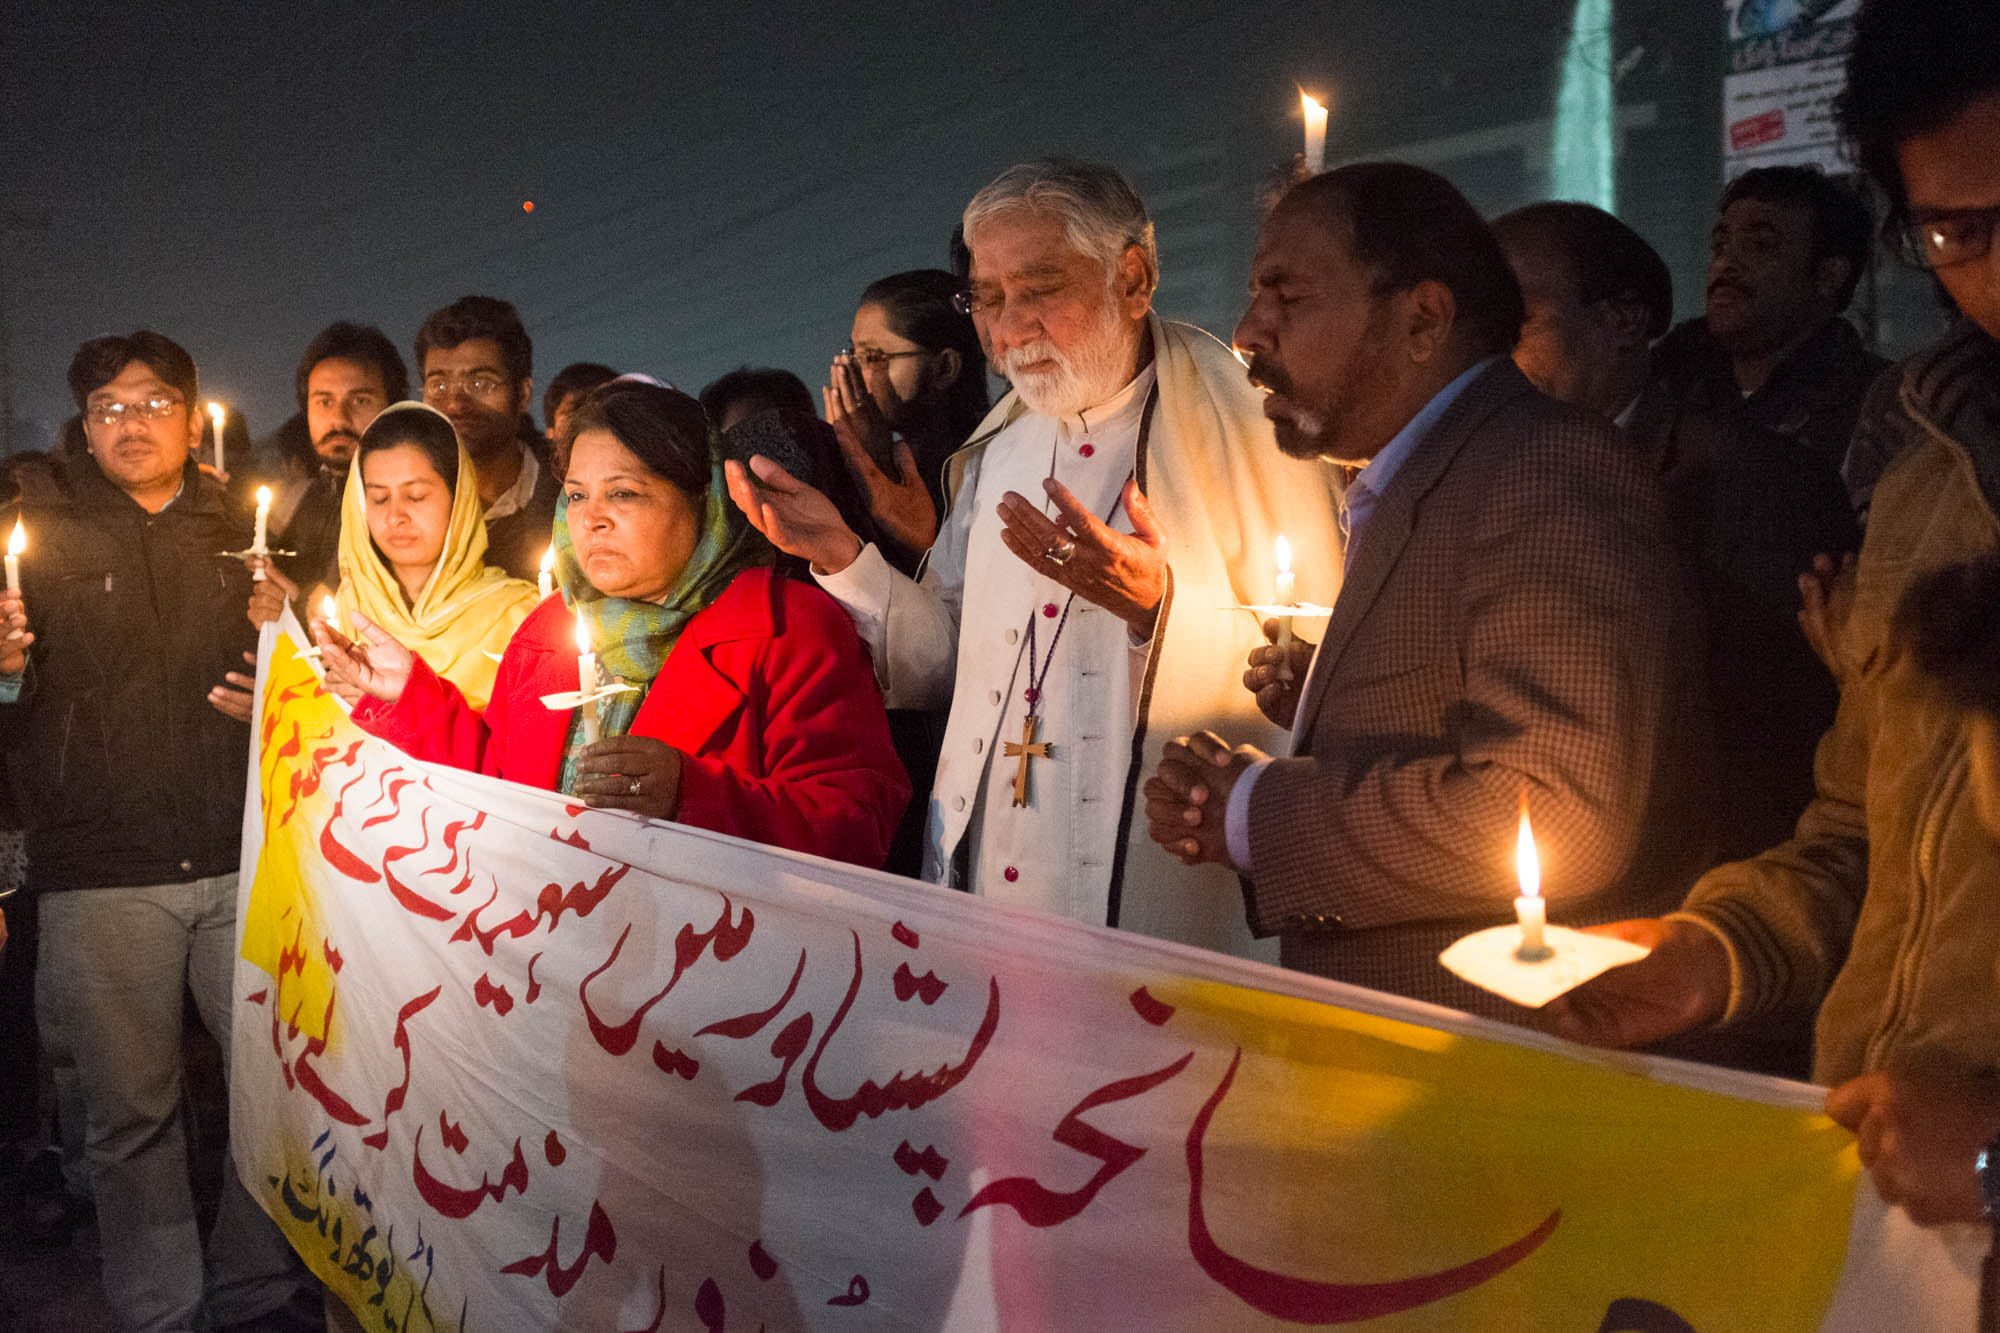  Following a terrorist attack on an Army Public School in Peshawar, in which 132 children were killed, Bishop Ramal Shah arrived at a vigil. He raised his hands and prayed for the children, their families and emphasised that Pakistan faces an enemy t